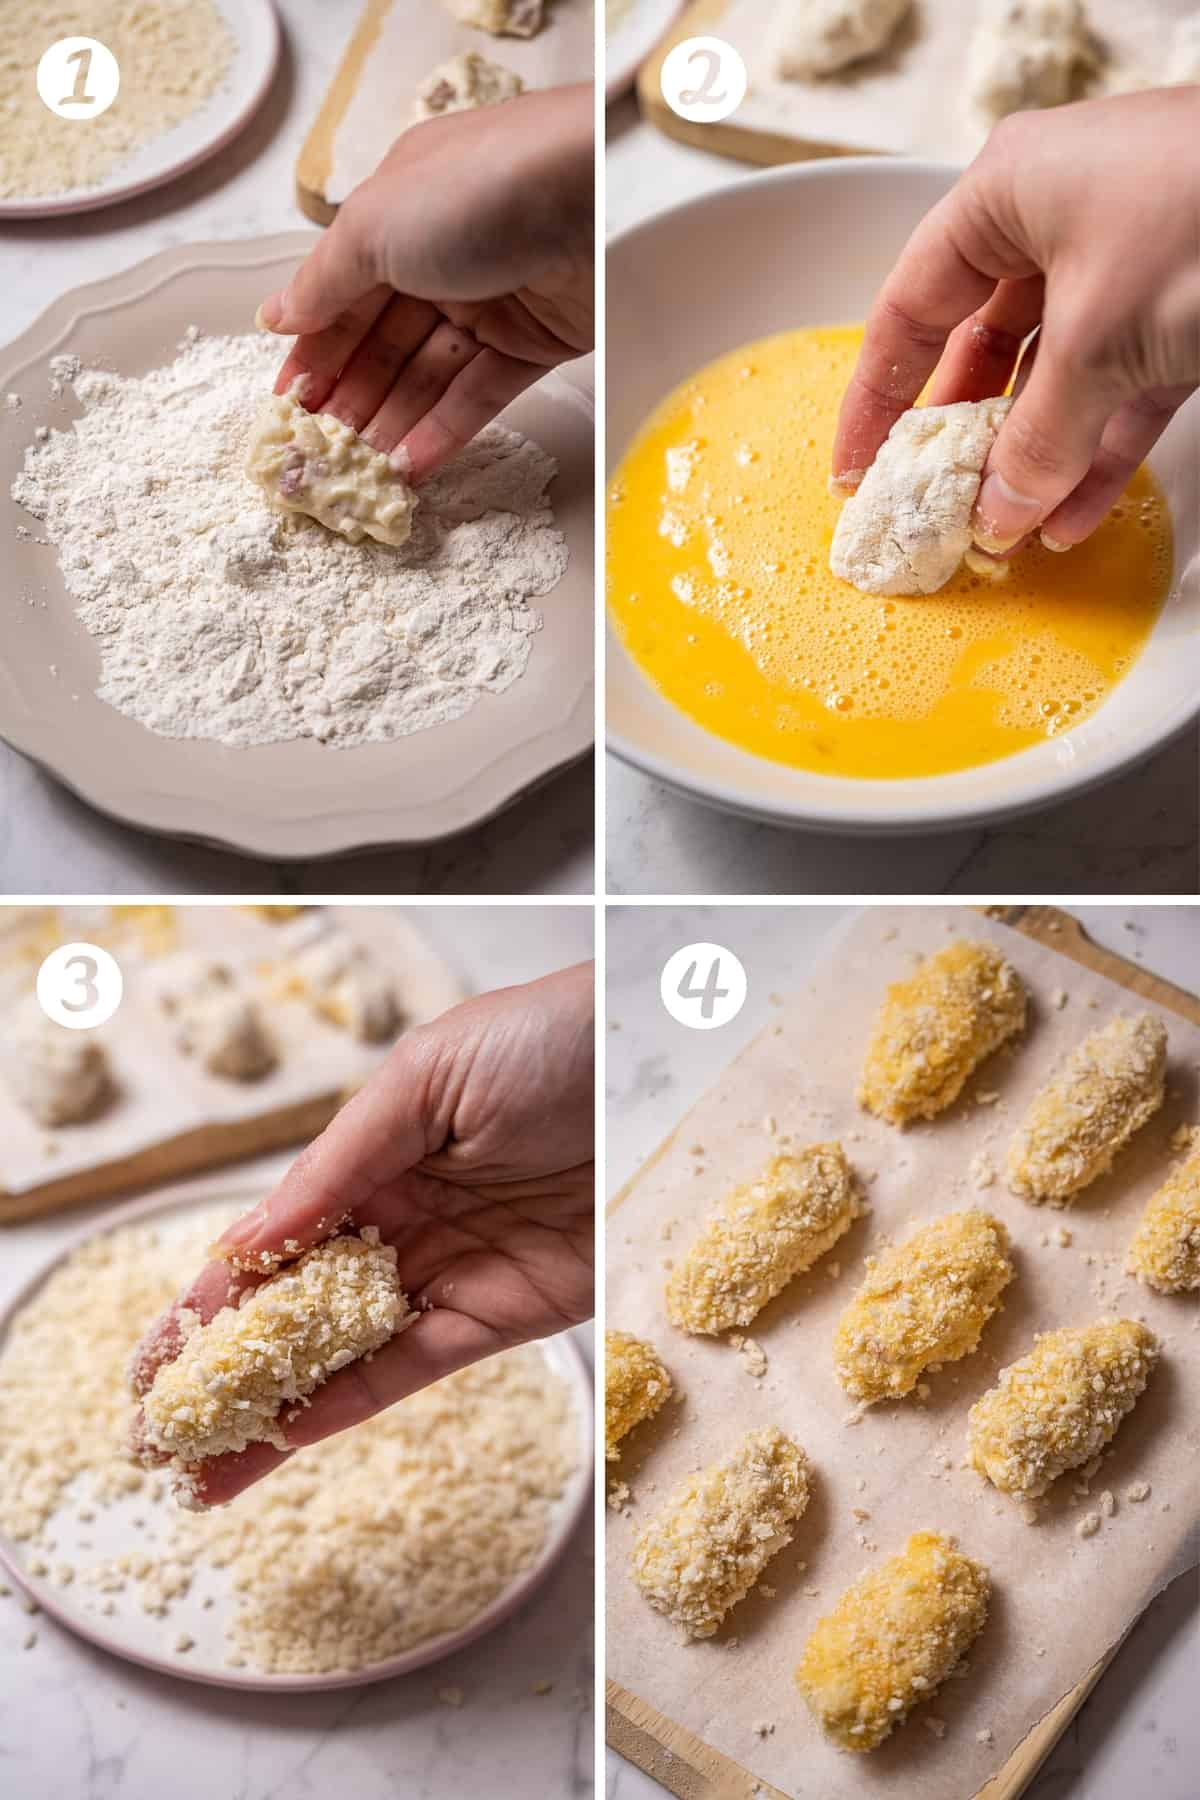 4 photos in a grid showing steps to bread and fry croquettes: dip in flour, dip in egg, dip in bread crumbs.